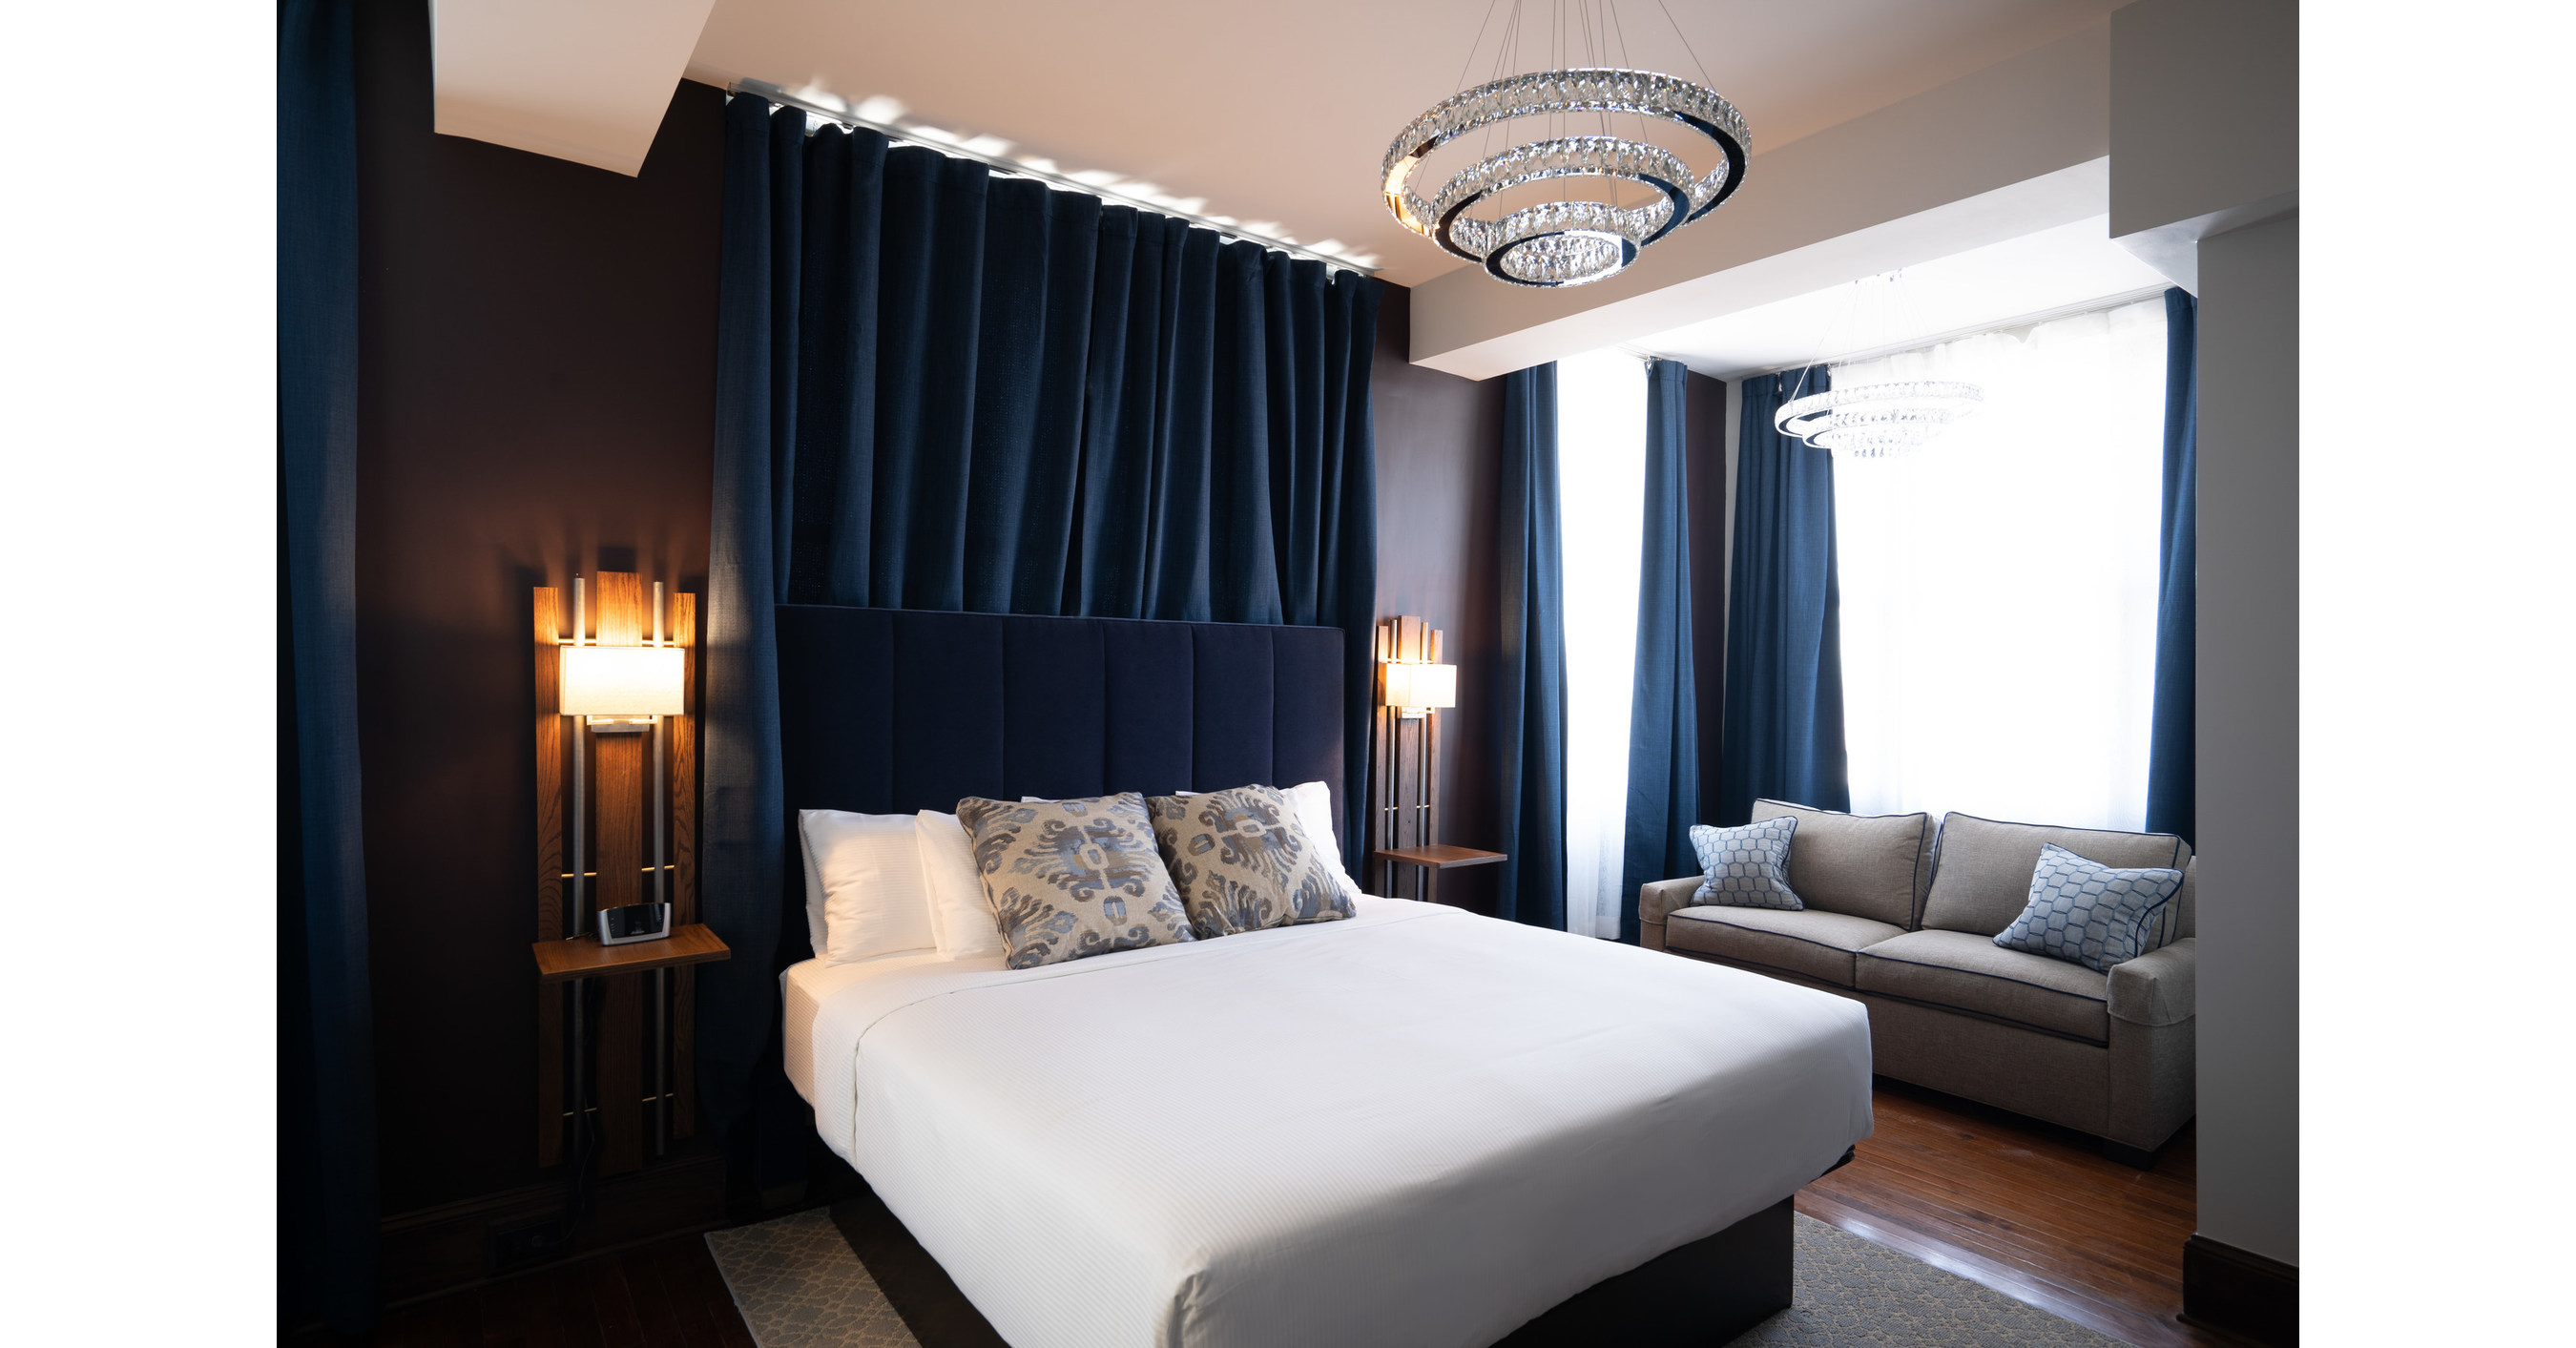 The Esquire Hotel Joins Ascend Hotel Collection Dec 23, 2019